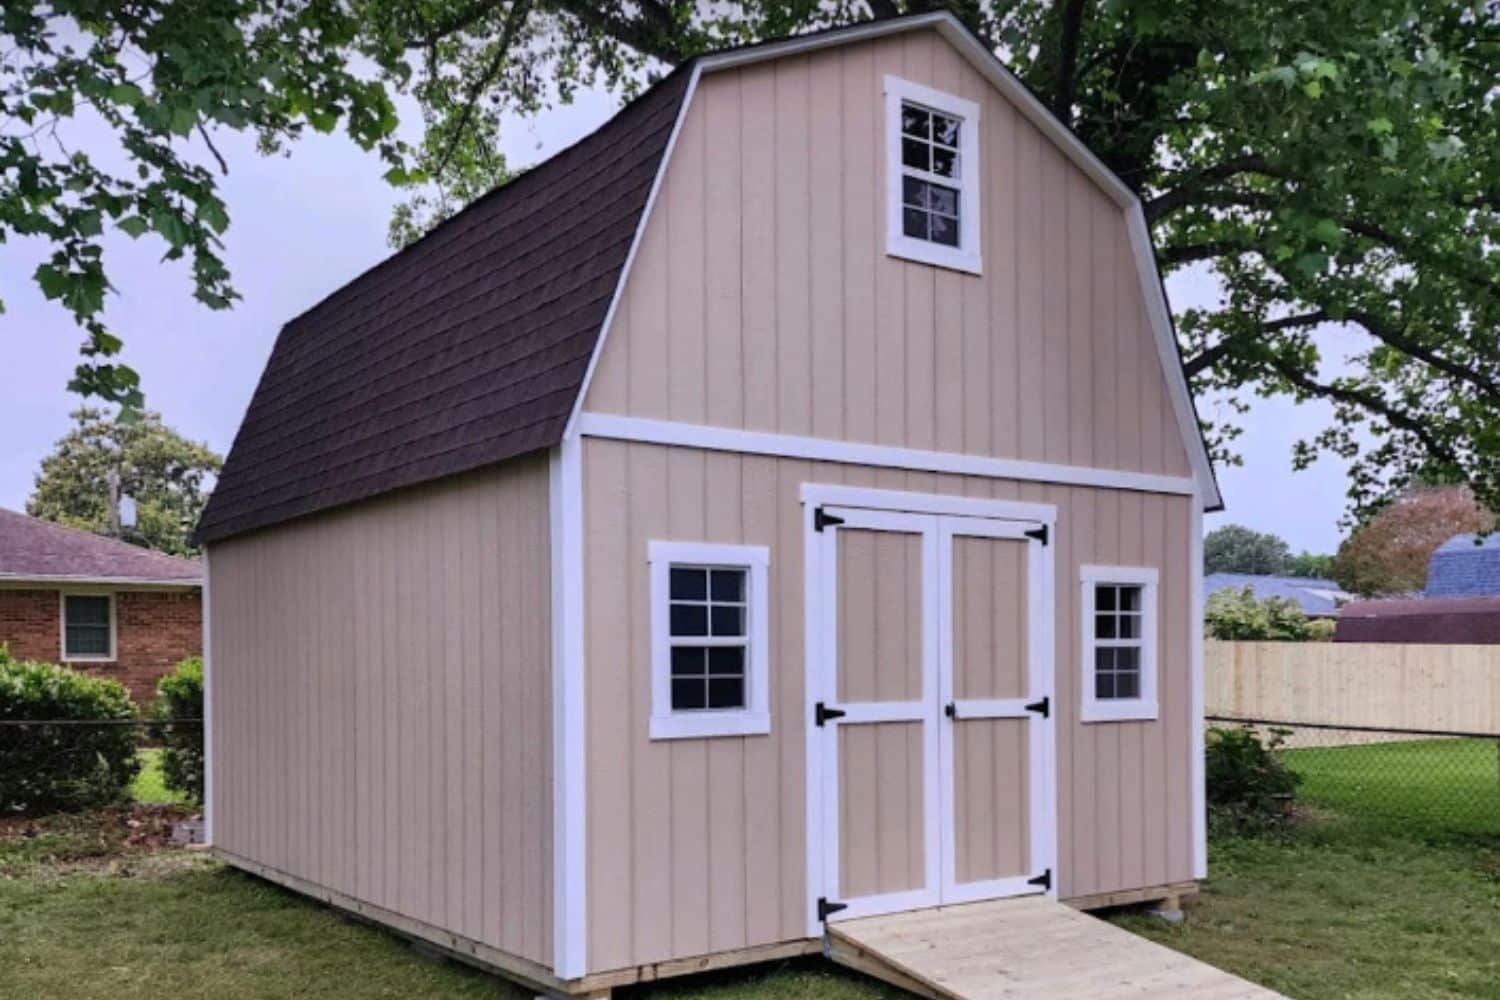 shannon stephens barn-style shed